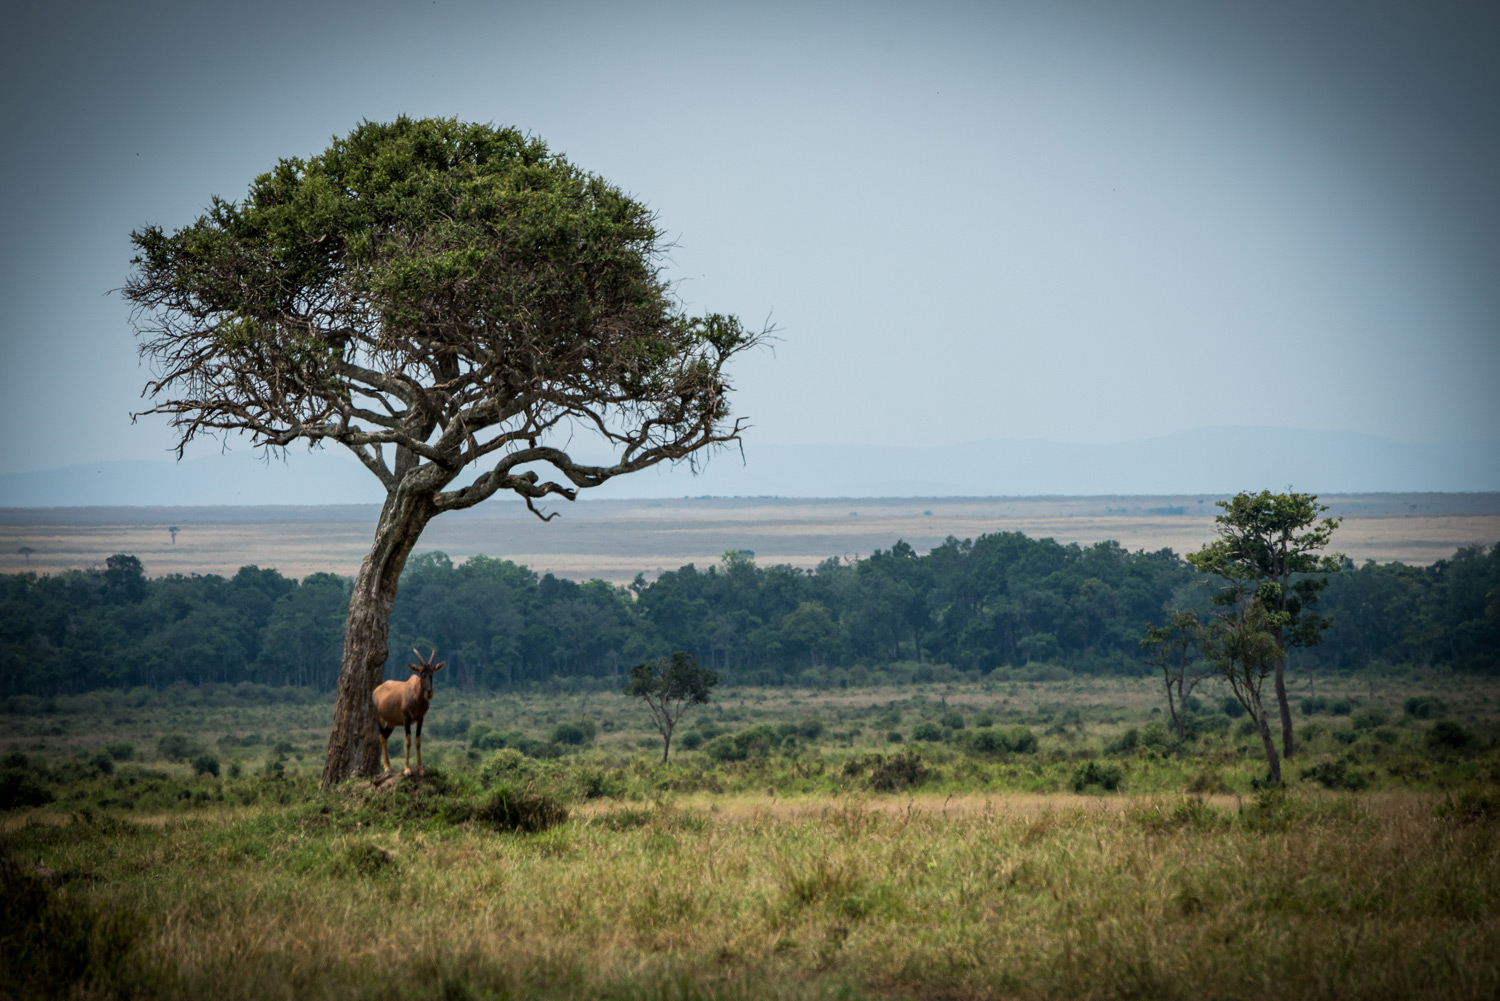 Topi and the tree in kenyan plains